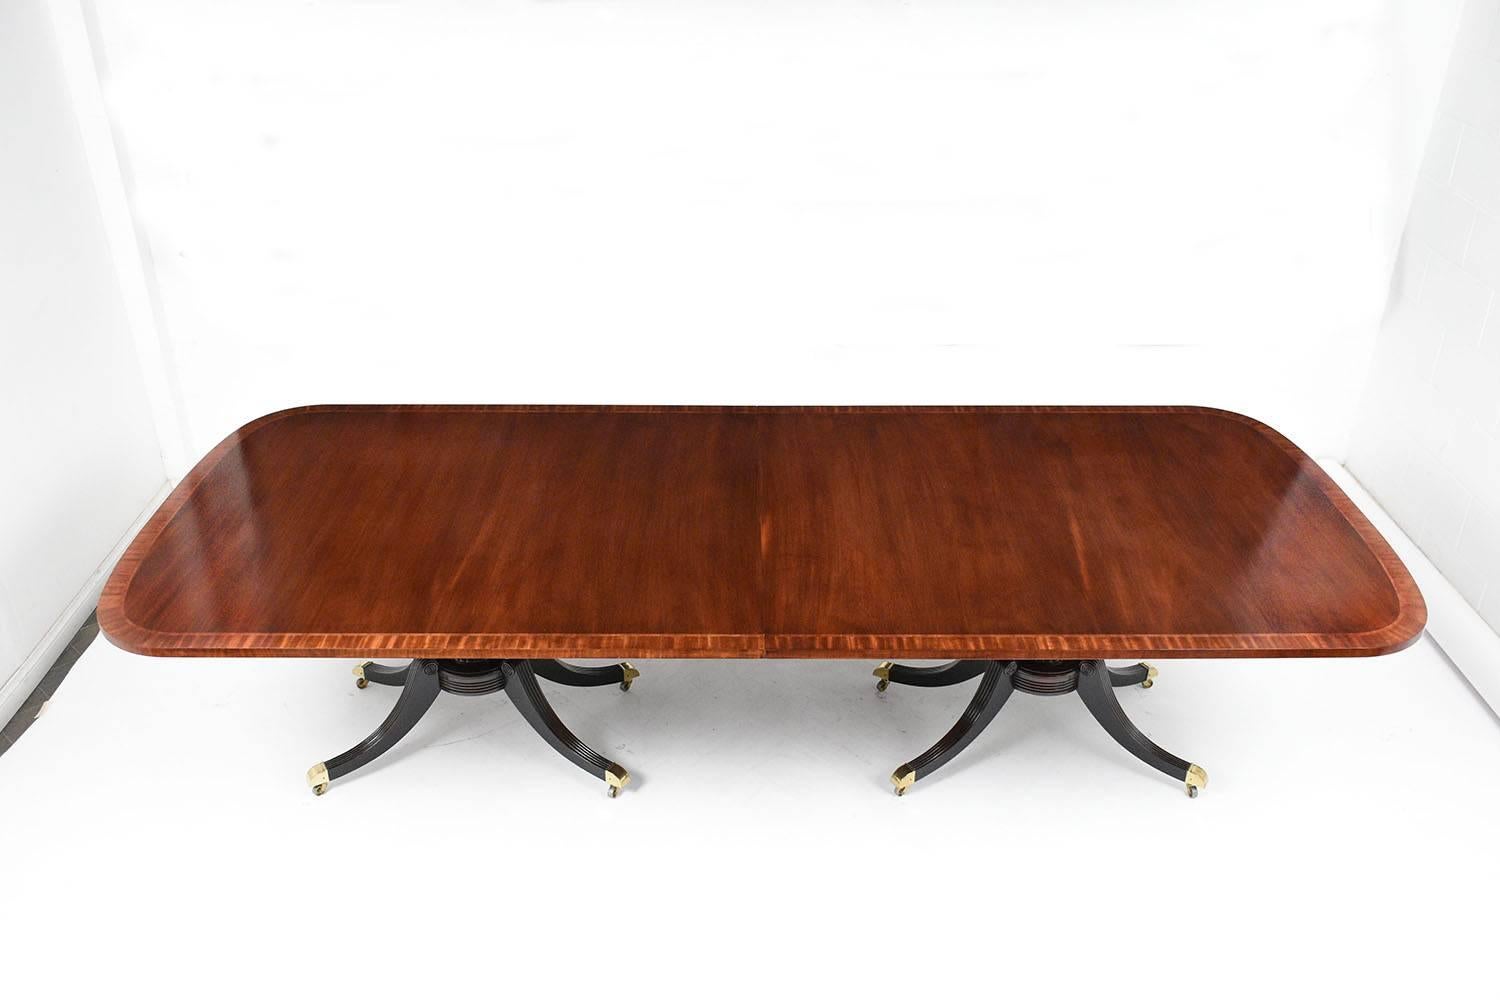 This 1980s Regency-style dining table is a special edition made by Baker Furniture Company. The dining table is made of mahogany wood stained in a rich mahogany color with a polished finish. The top of the table features an inlaid marquetry boarder